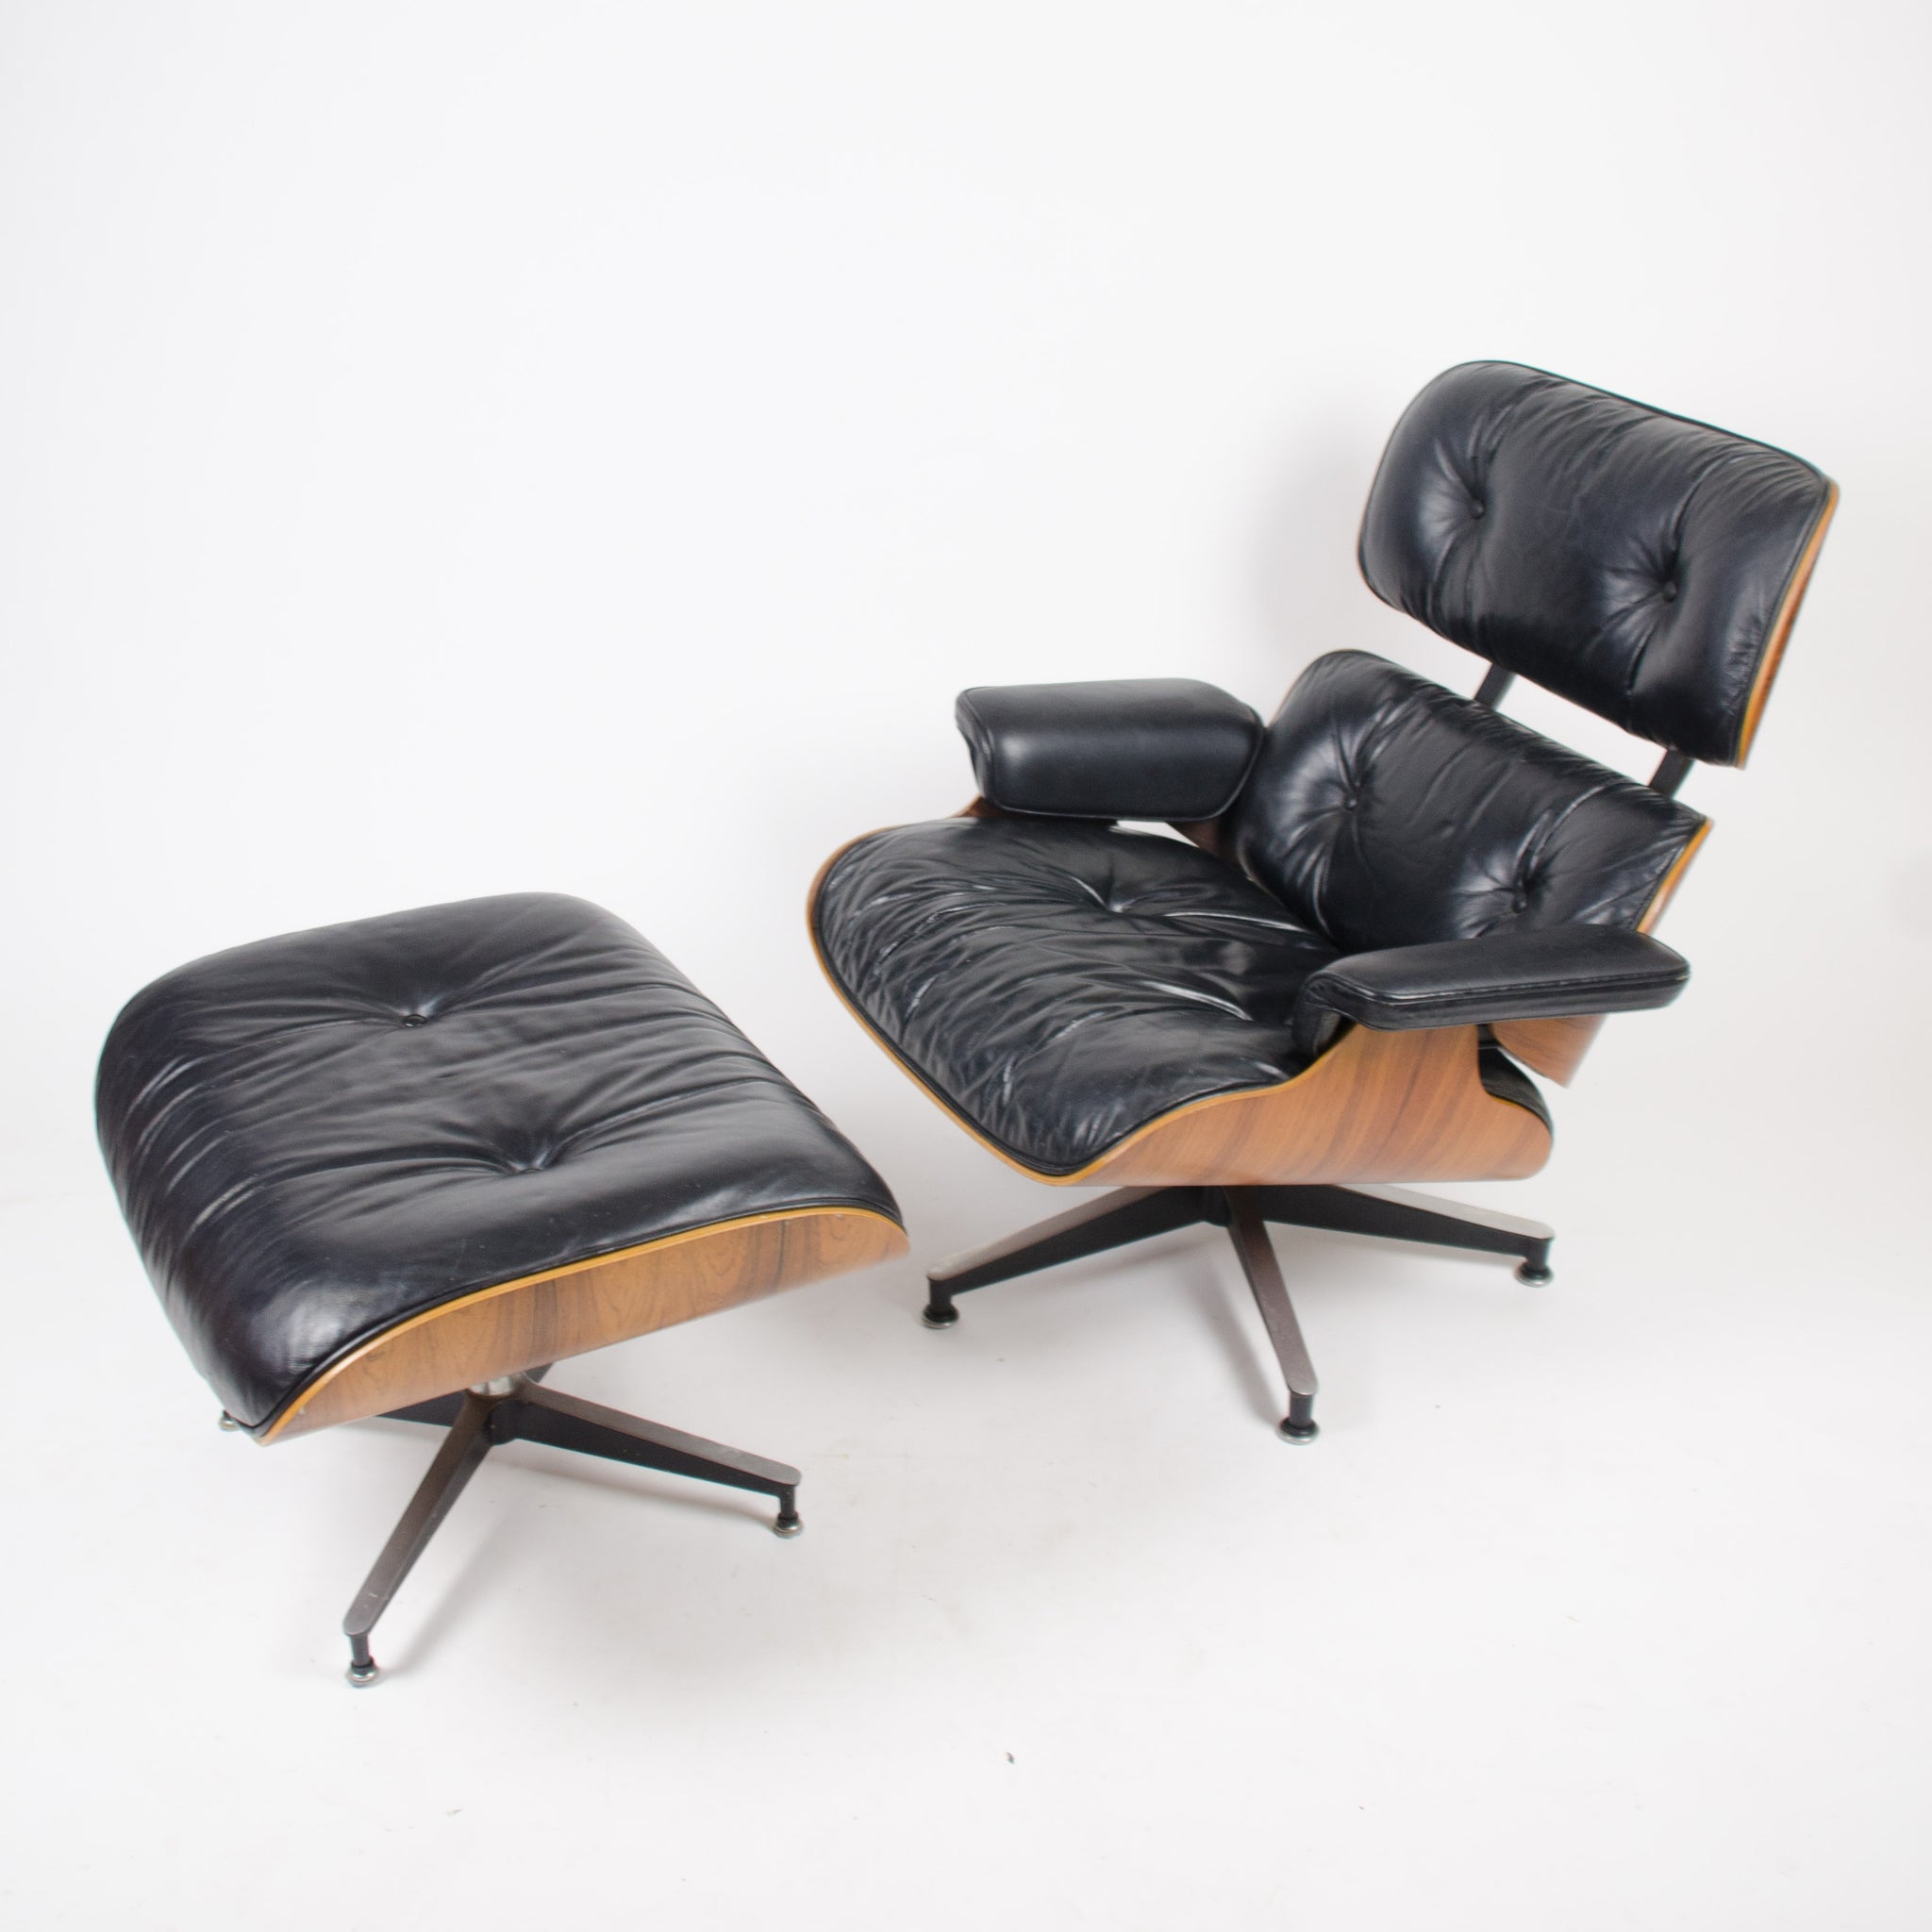 SOLD 1970's Herman Miller Eames Lounge Chair & Ottoman Rosewood 670 671 Black Leather